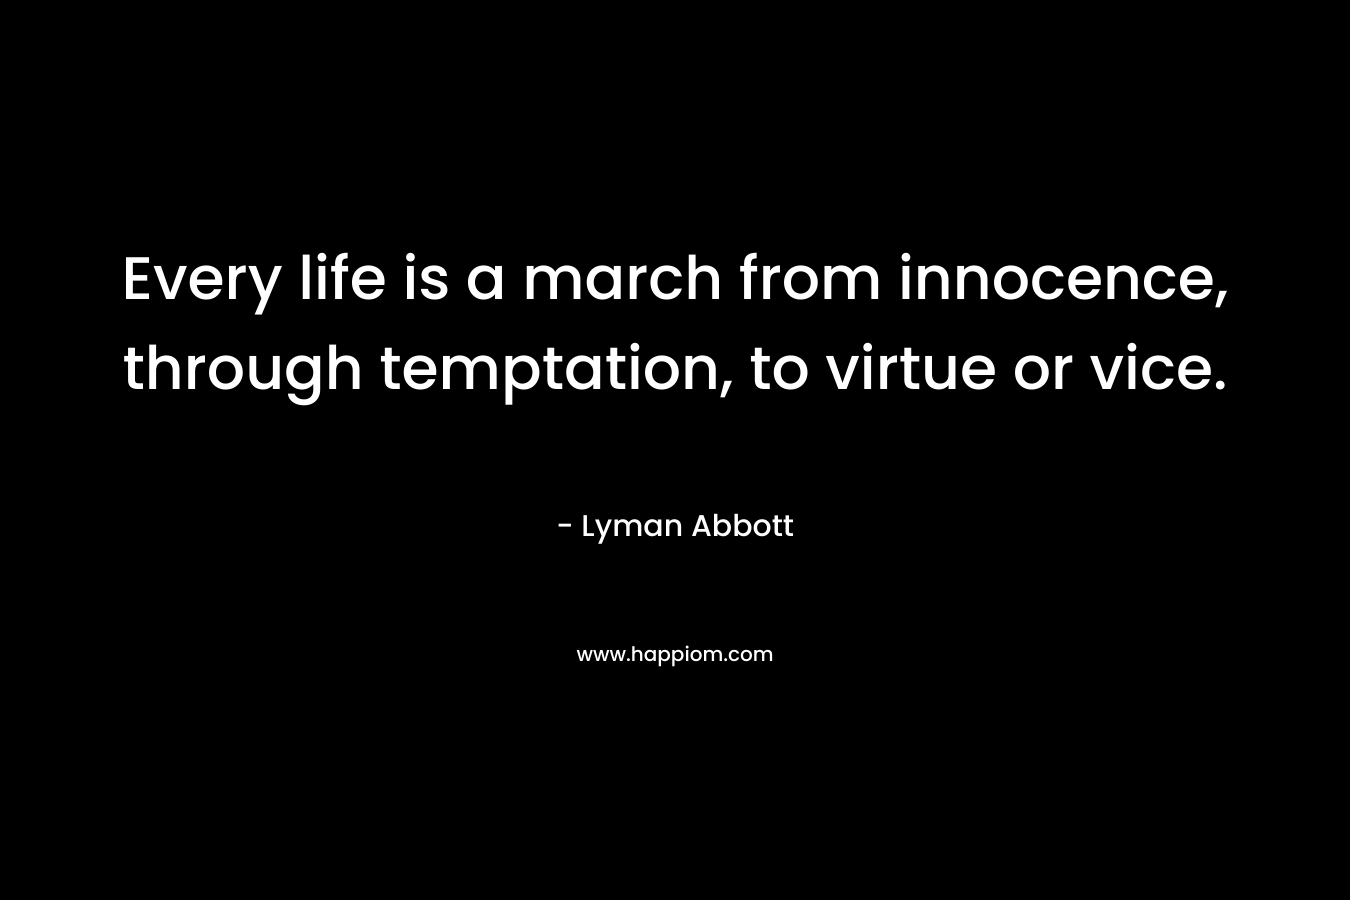 Every life is a march from innocence, through temptation, to virtue or vice.